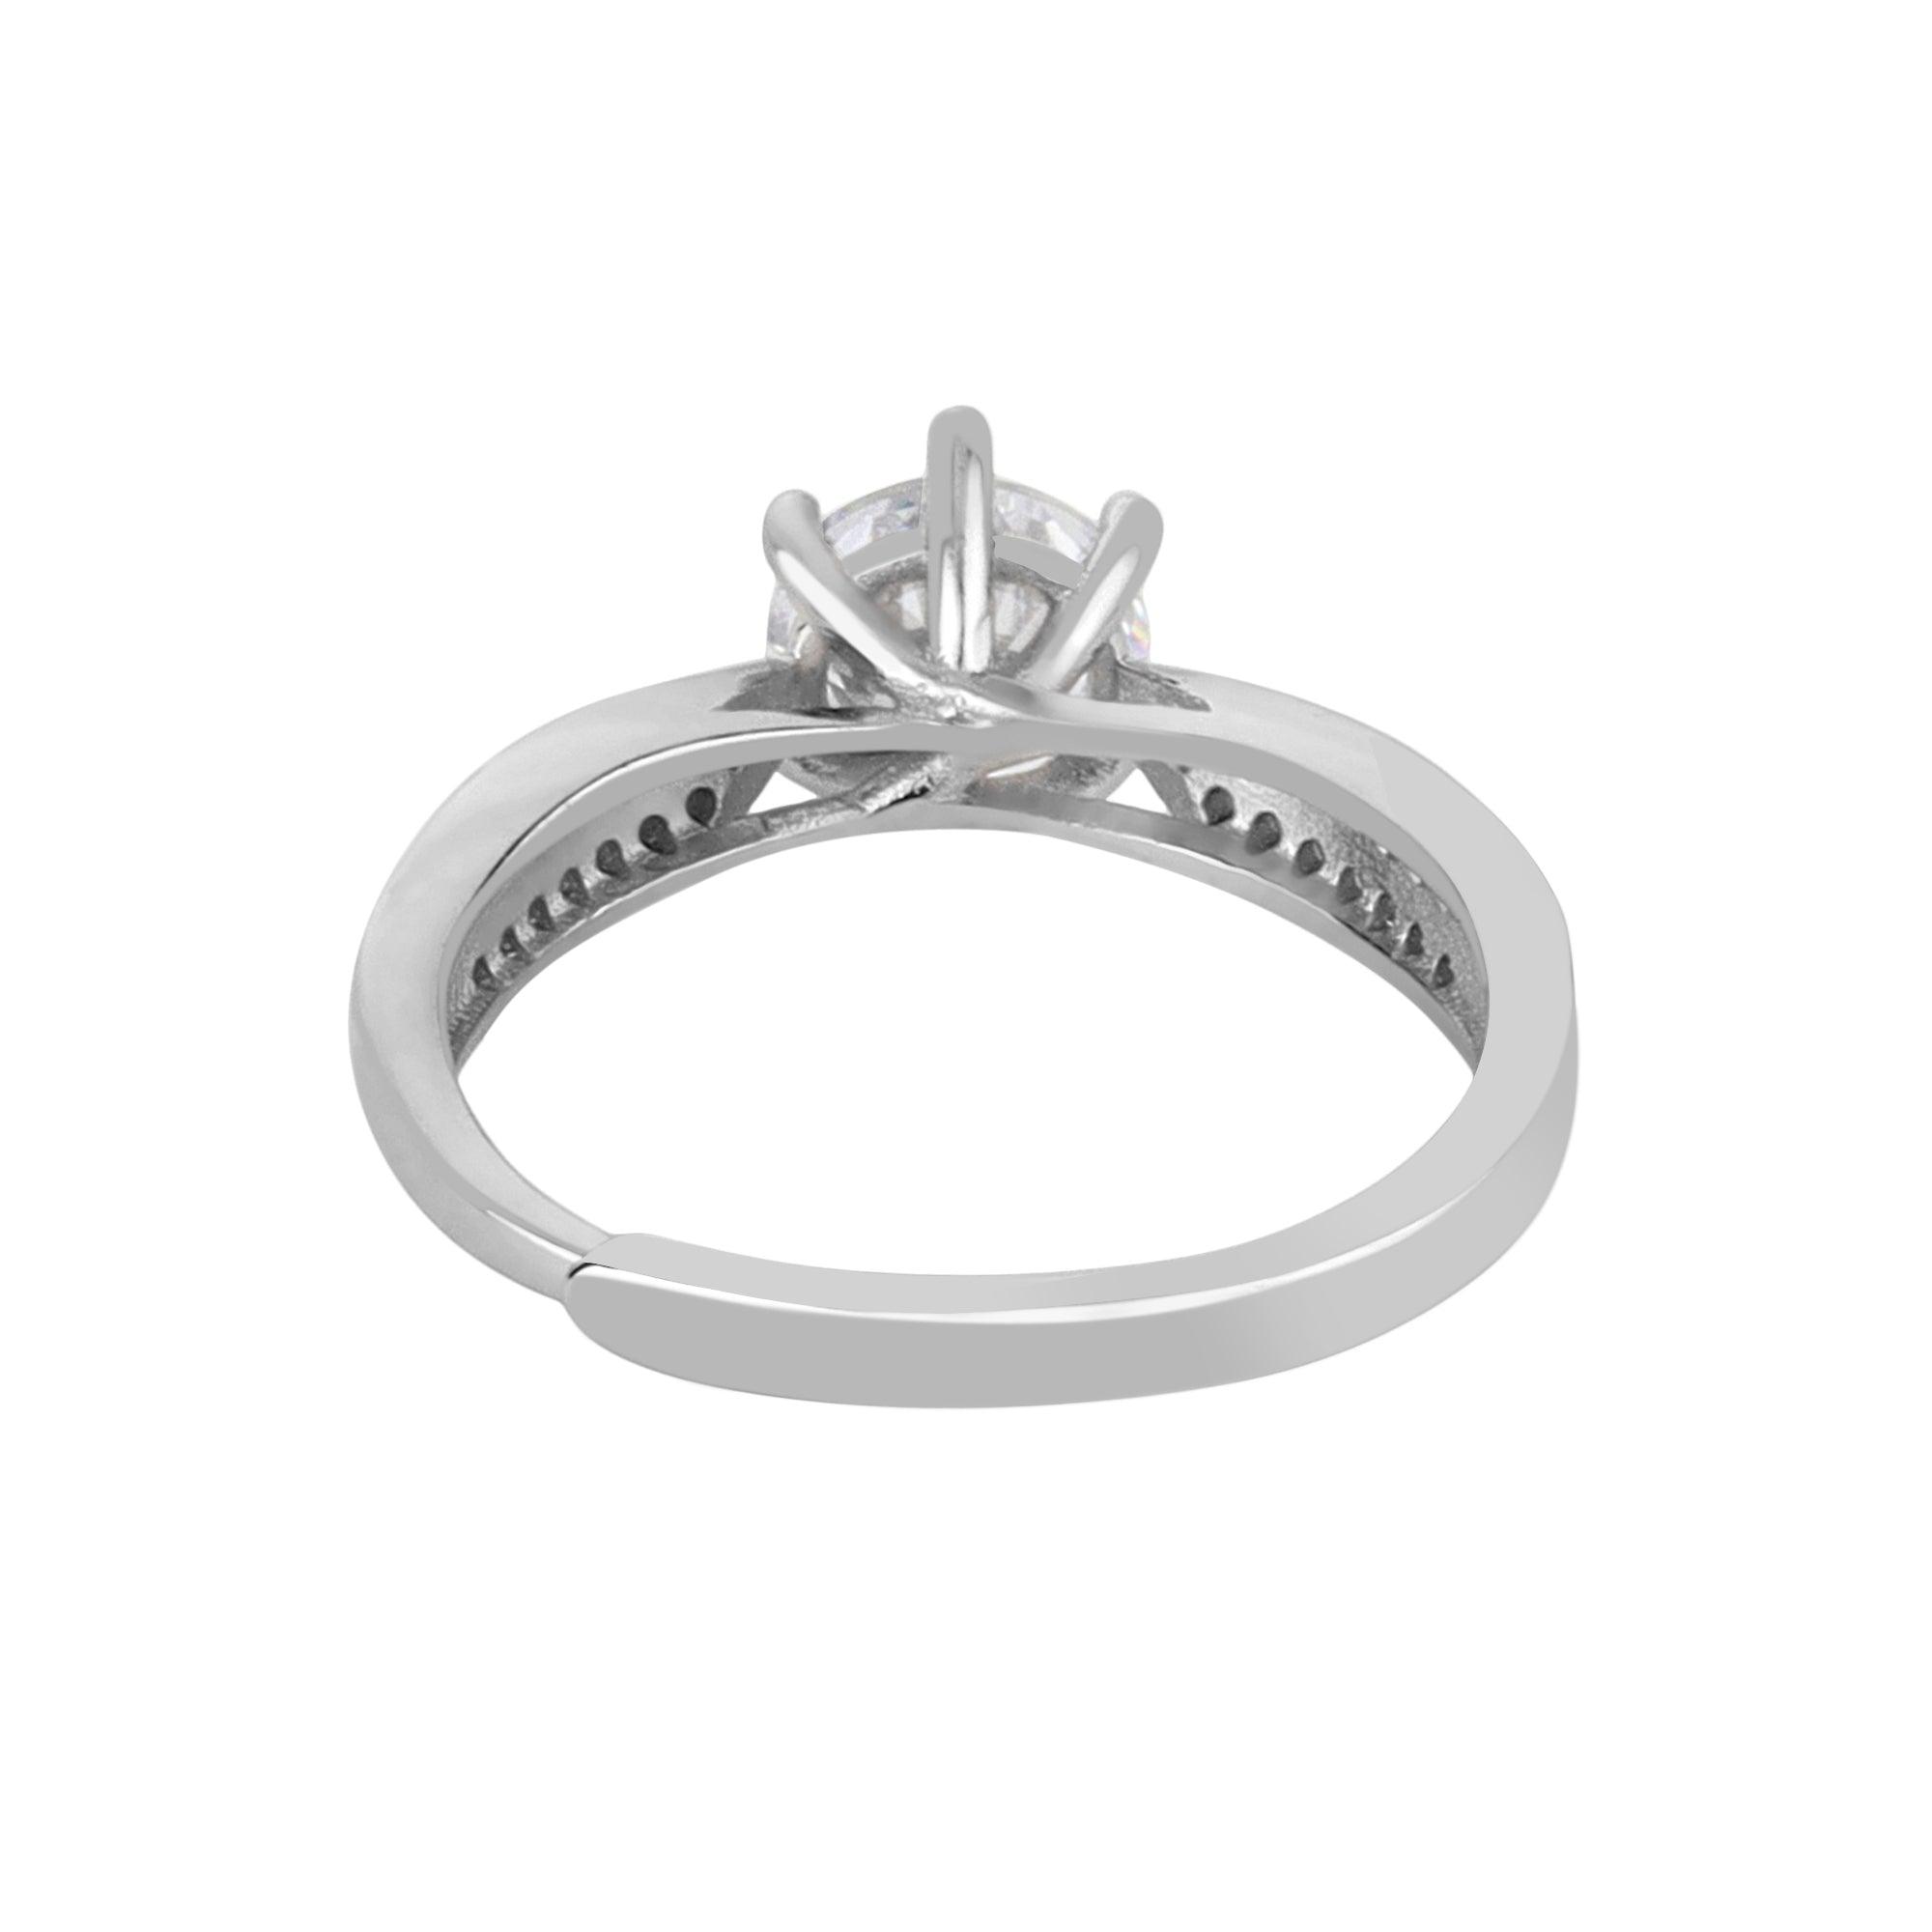 Bloom Style Silver Solitaire Ring - silvermark